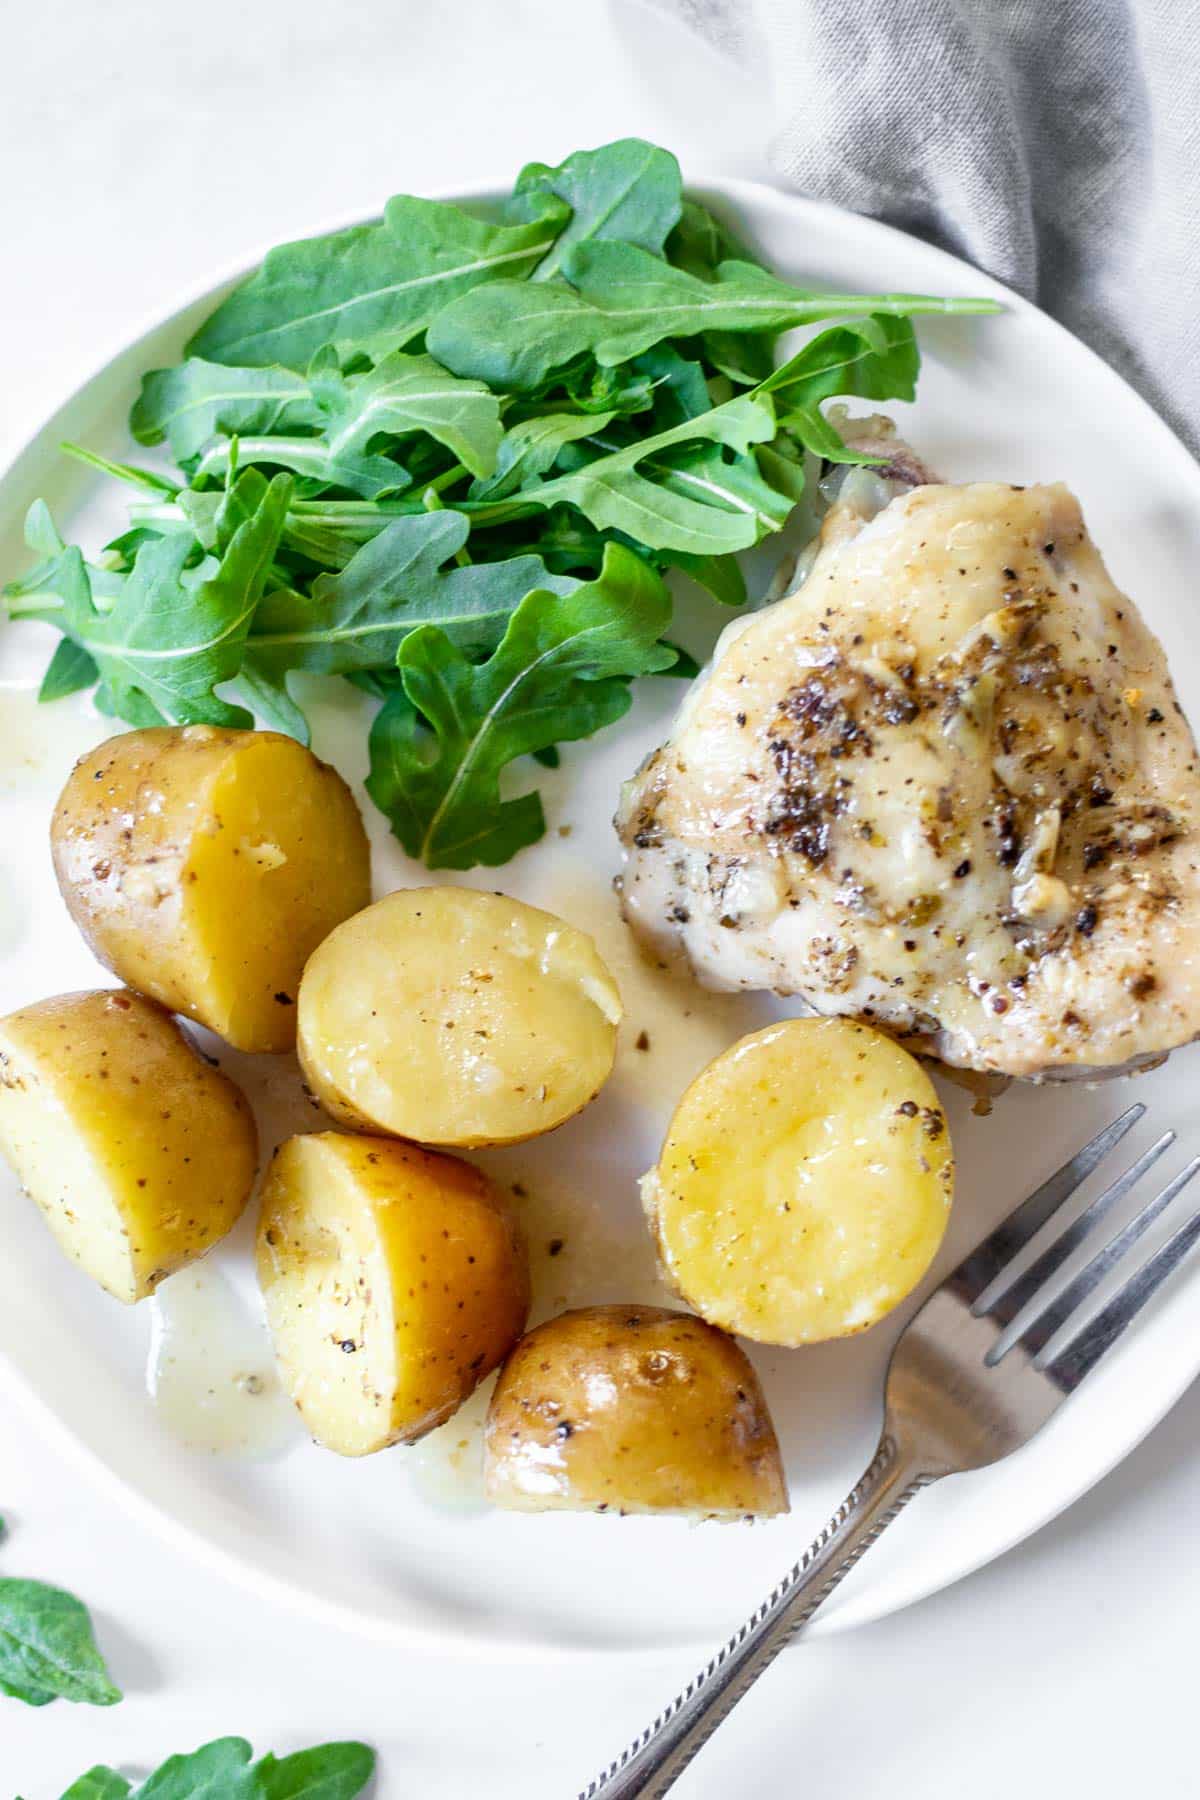 Chicken thighs, potatoes, arugula on a dinner plate with a fork.